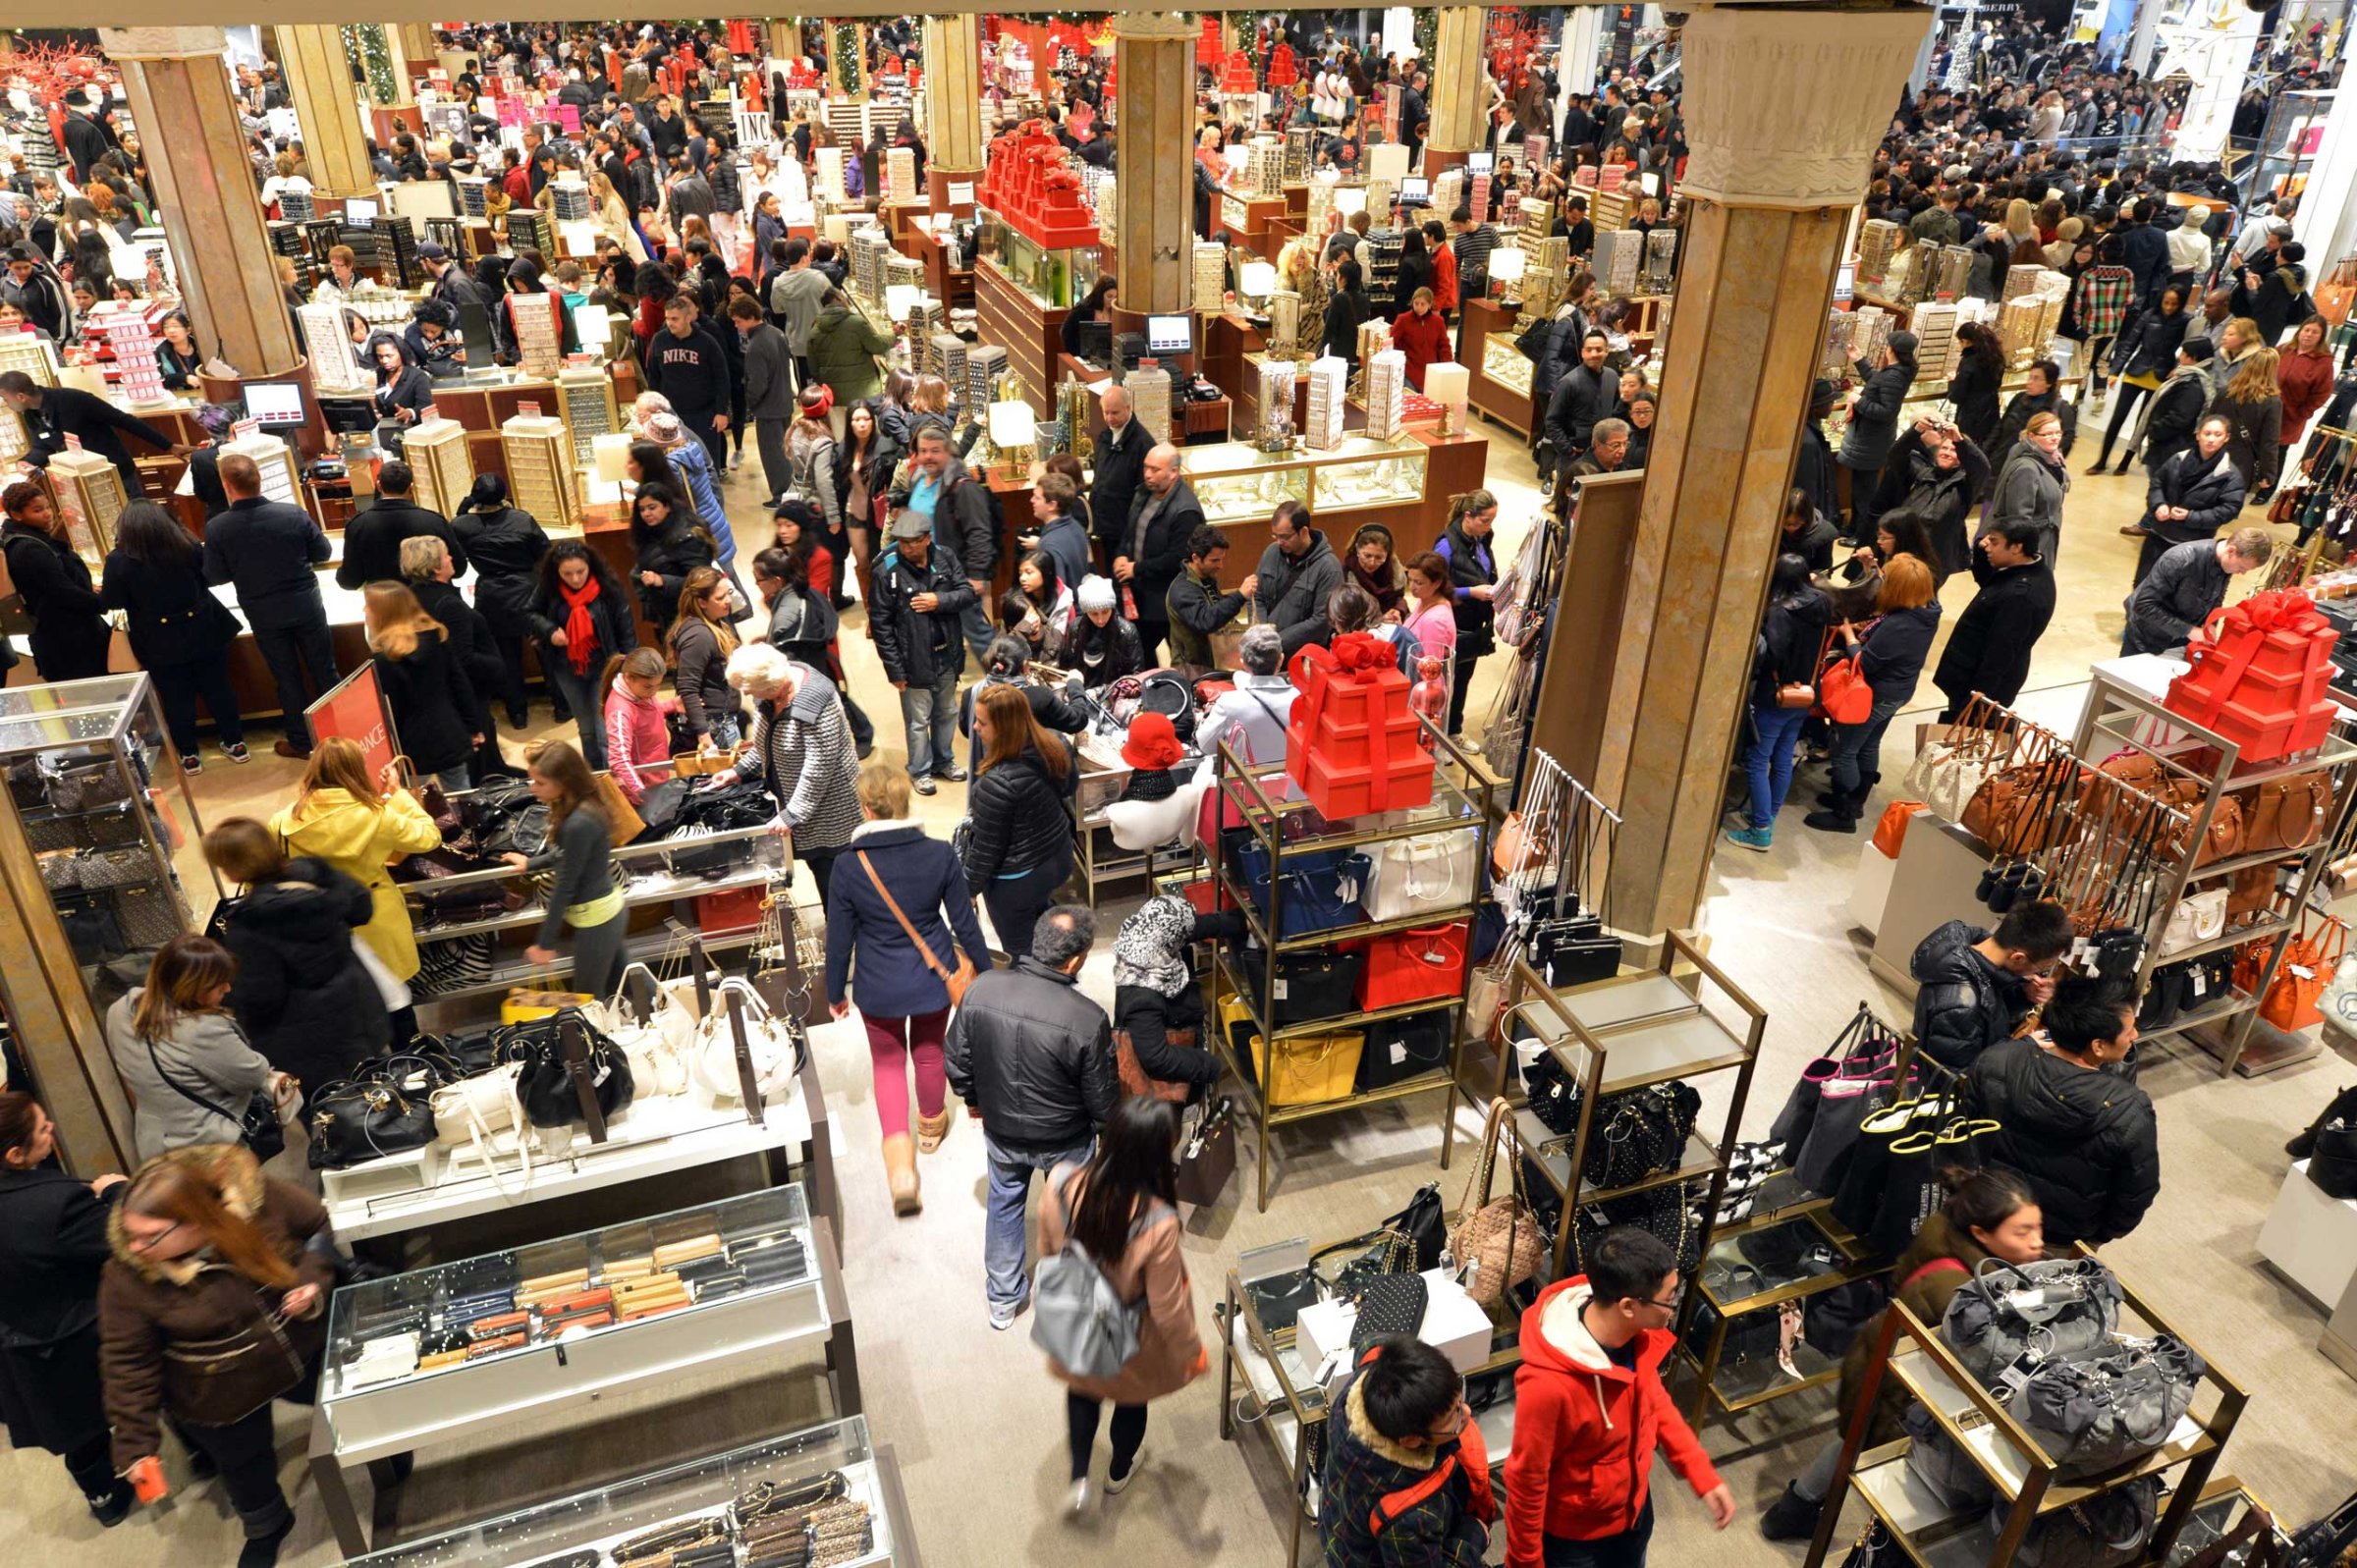 People crowd the first floor of Macy's department store as they open at midnight on Nov. 23, 2012 in New York to start the stores' "Black Friday" shopping weekend.